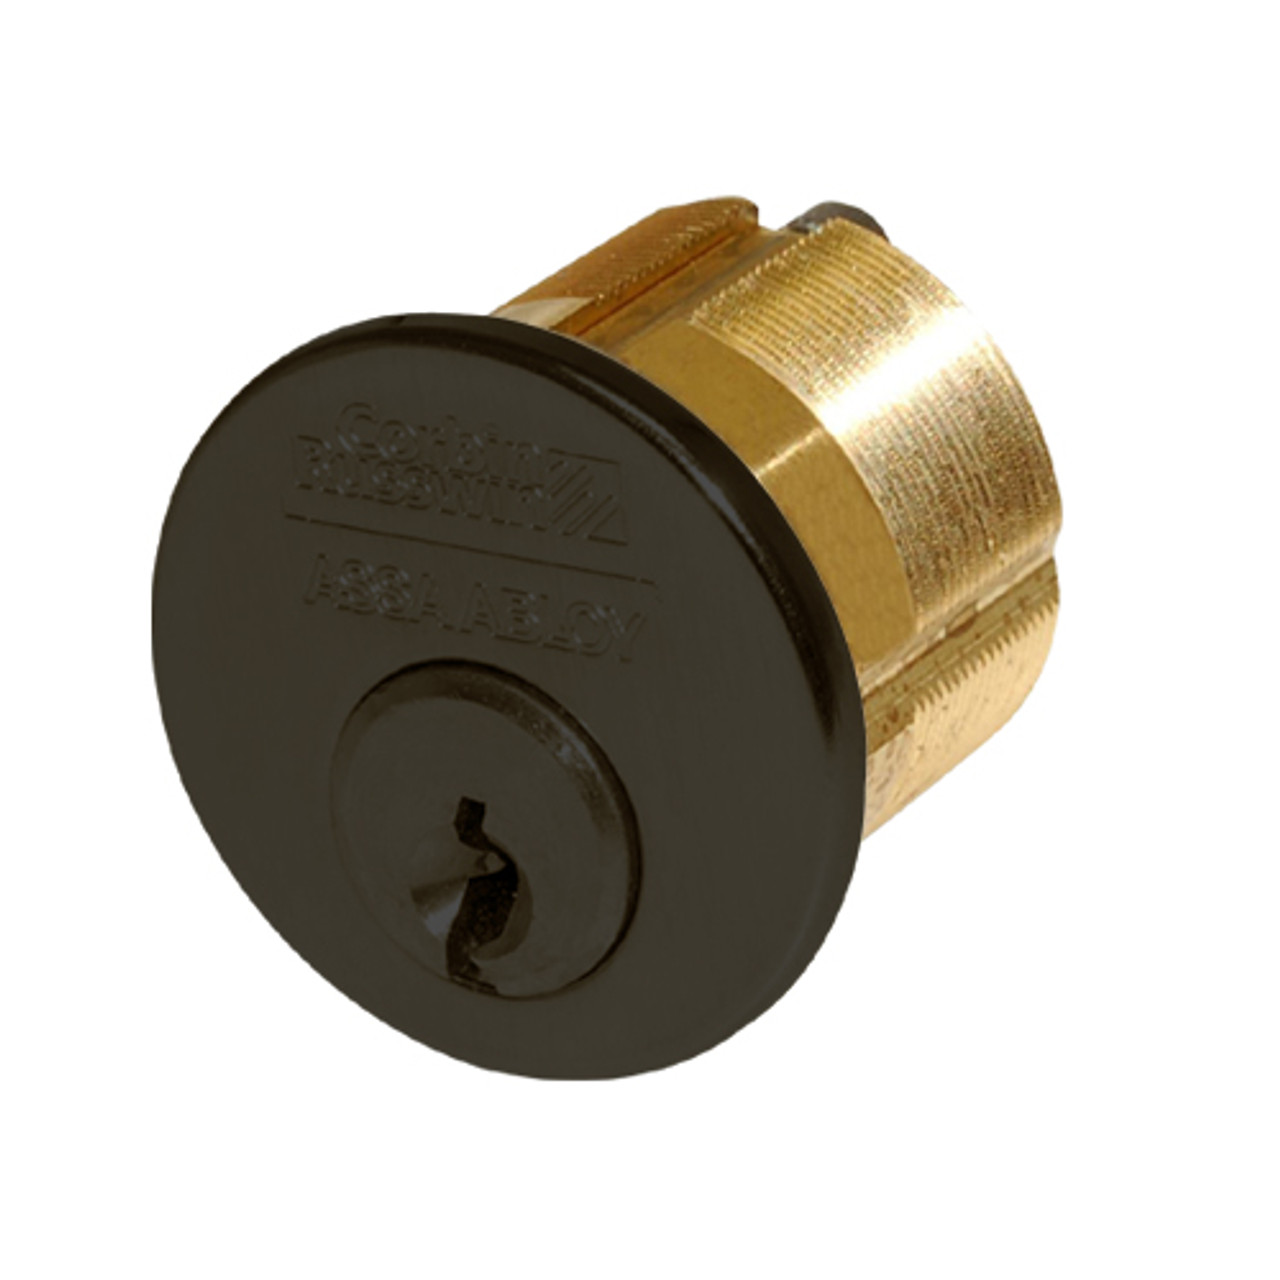 CR1000-138-A06-6-D1-613 Corbin Conventional Mortise Cylinder for Mortise Lock and DL3000 Deadlocks with Schlage L9000 Cam in Oil Rubbed Bronze Finish